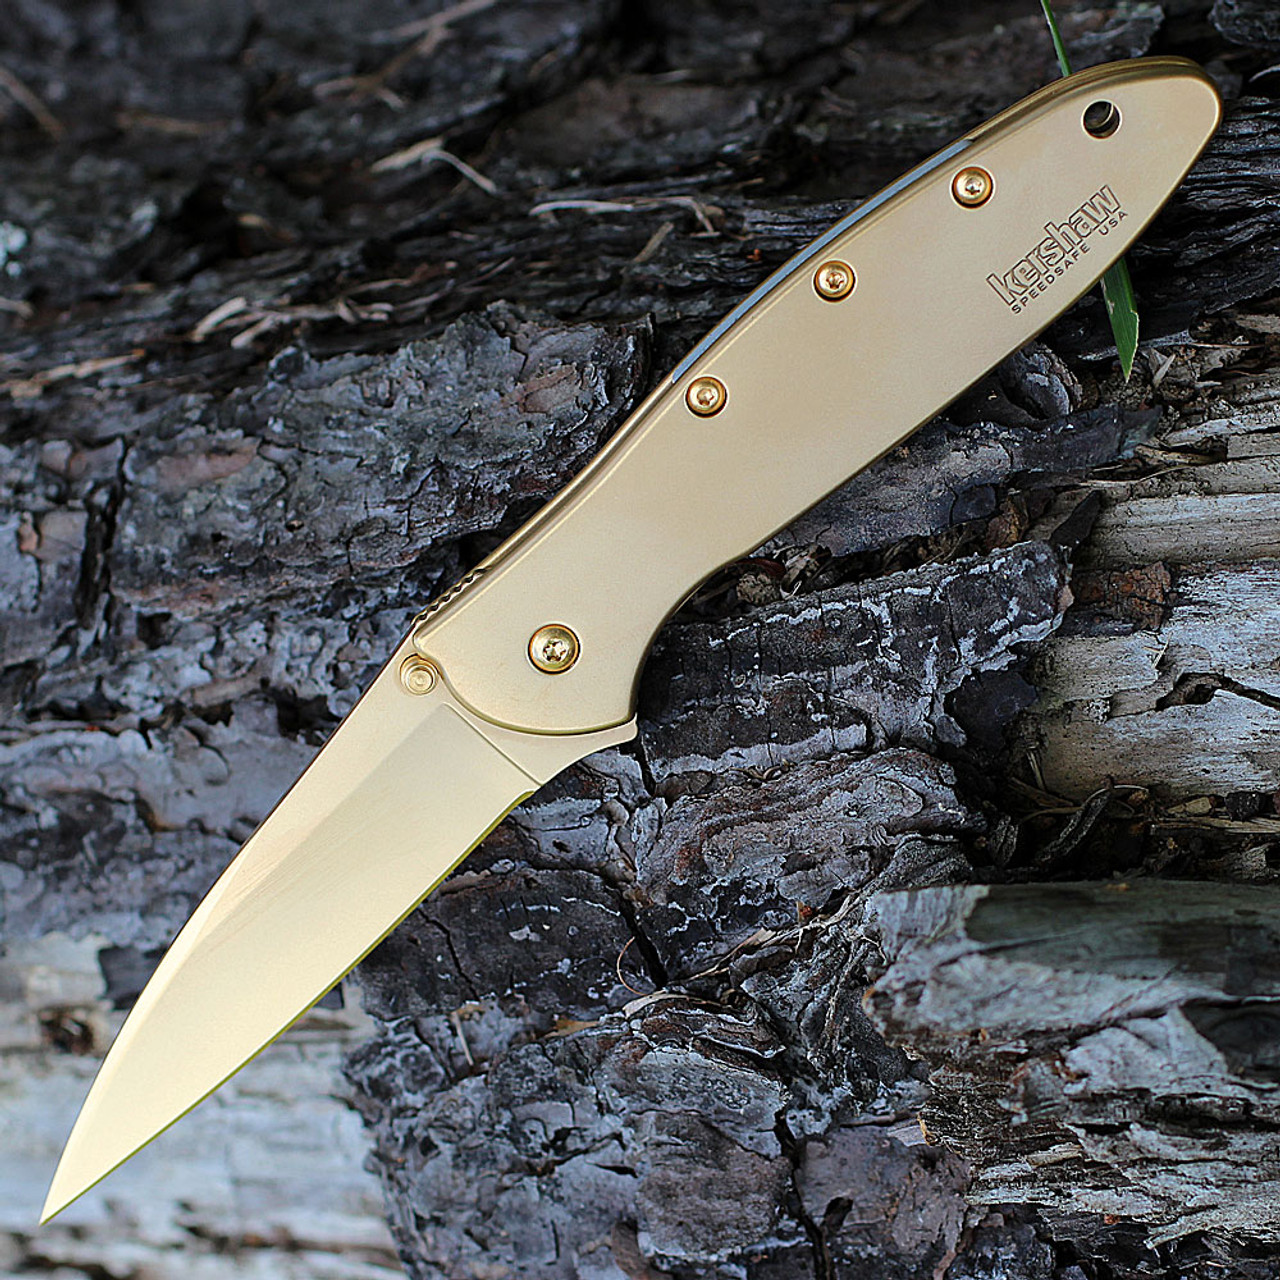 Kershaw Leek Assisted Opening Knife (1660G)- 3.00" Gold Plated Sandvik 14C28N Drop Point Blade, Gold Plated Stainless Steel Handle